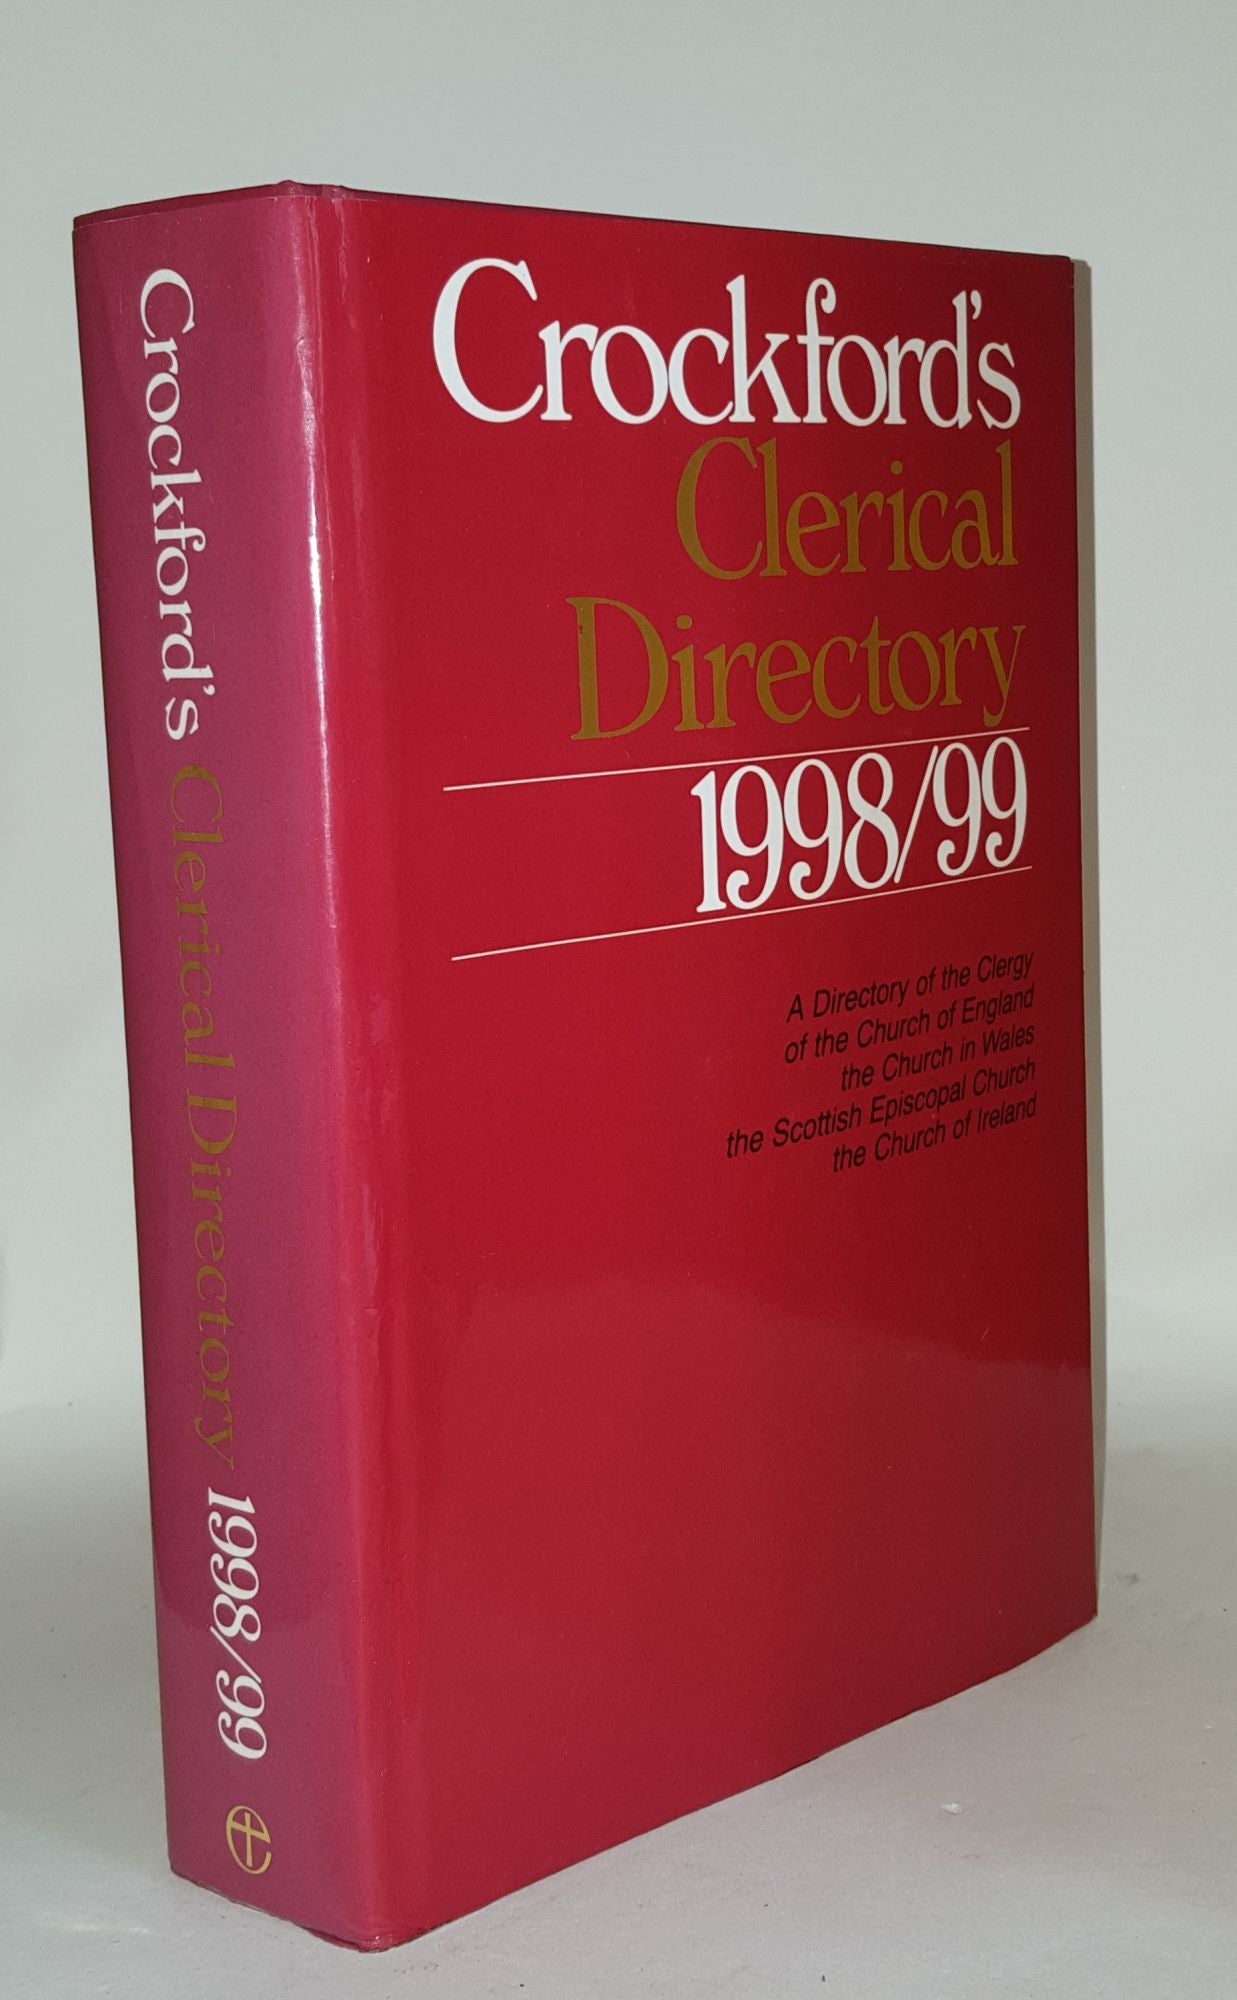 Anon - Crockford's Clerical Directory 1998-99